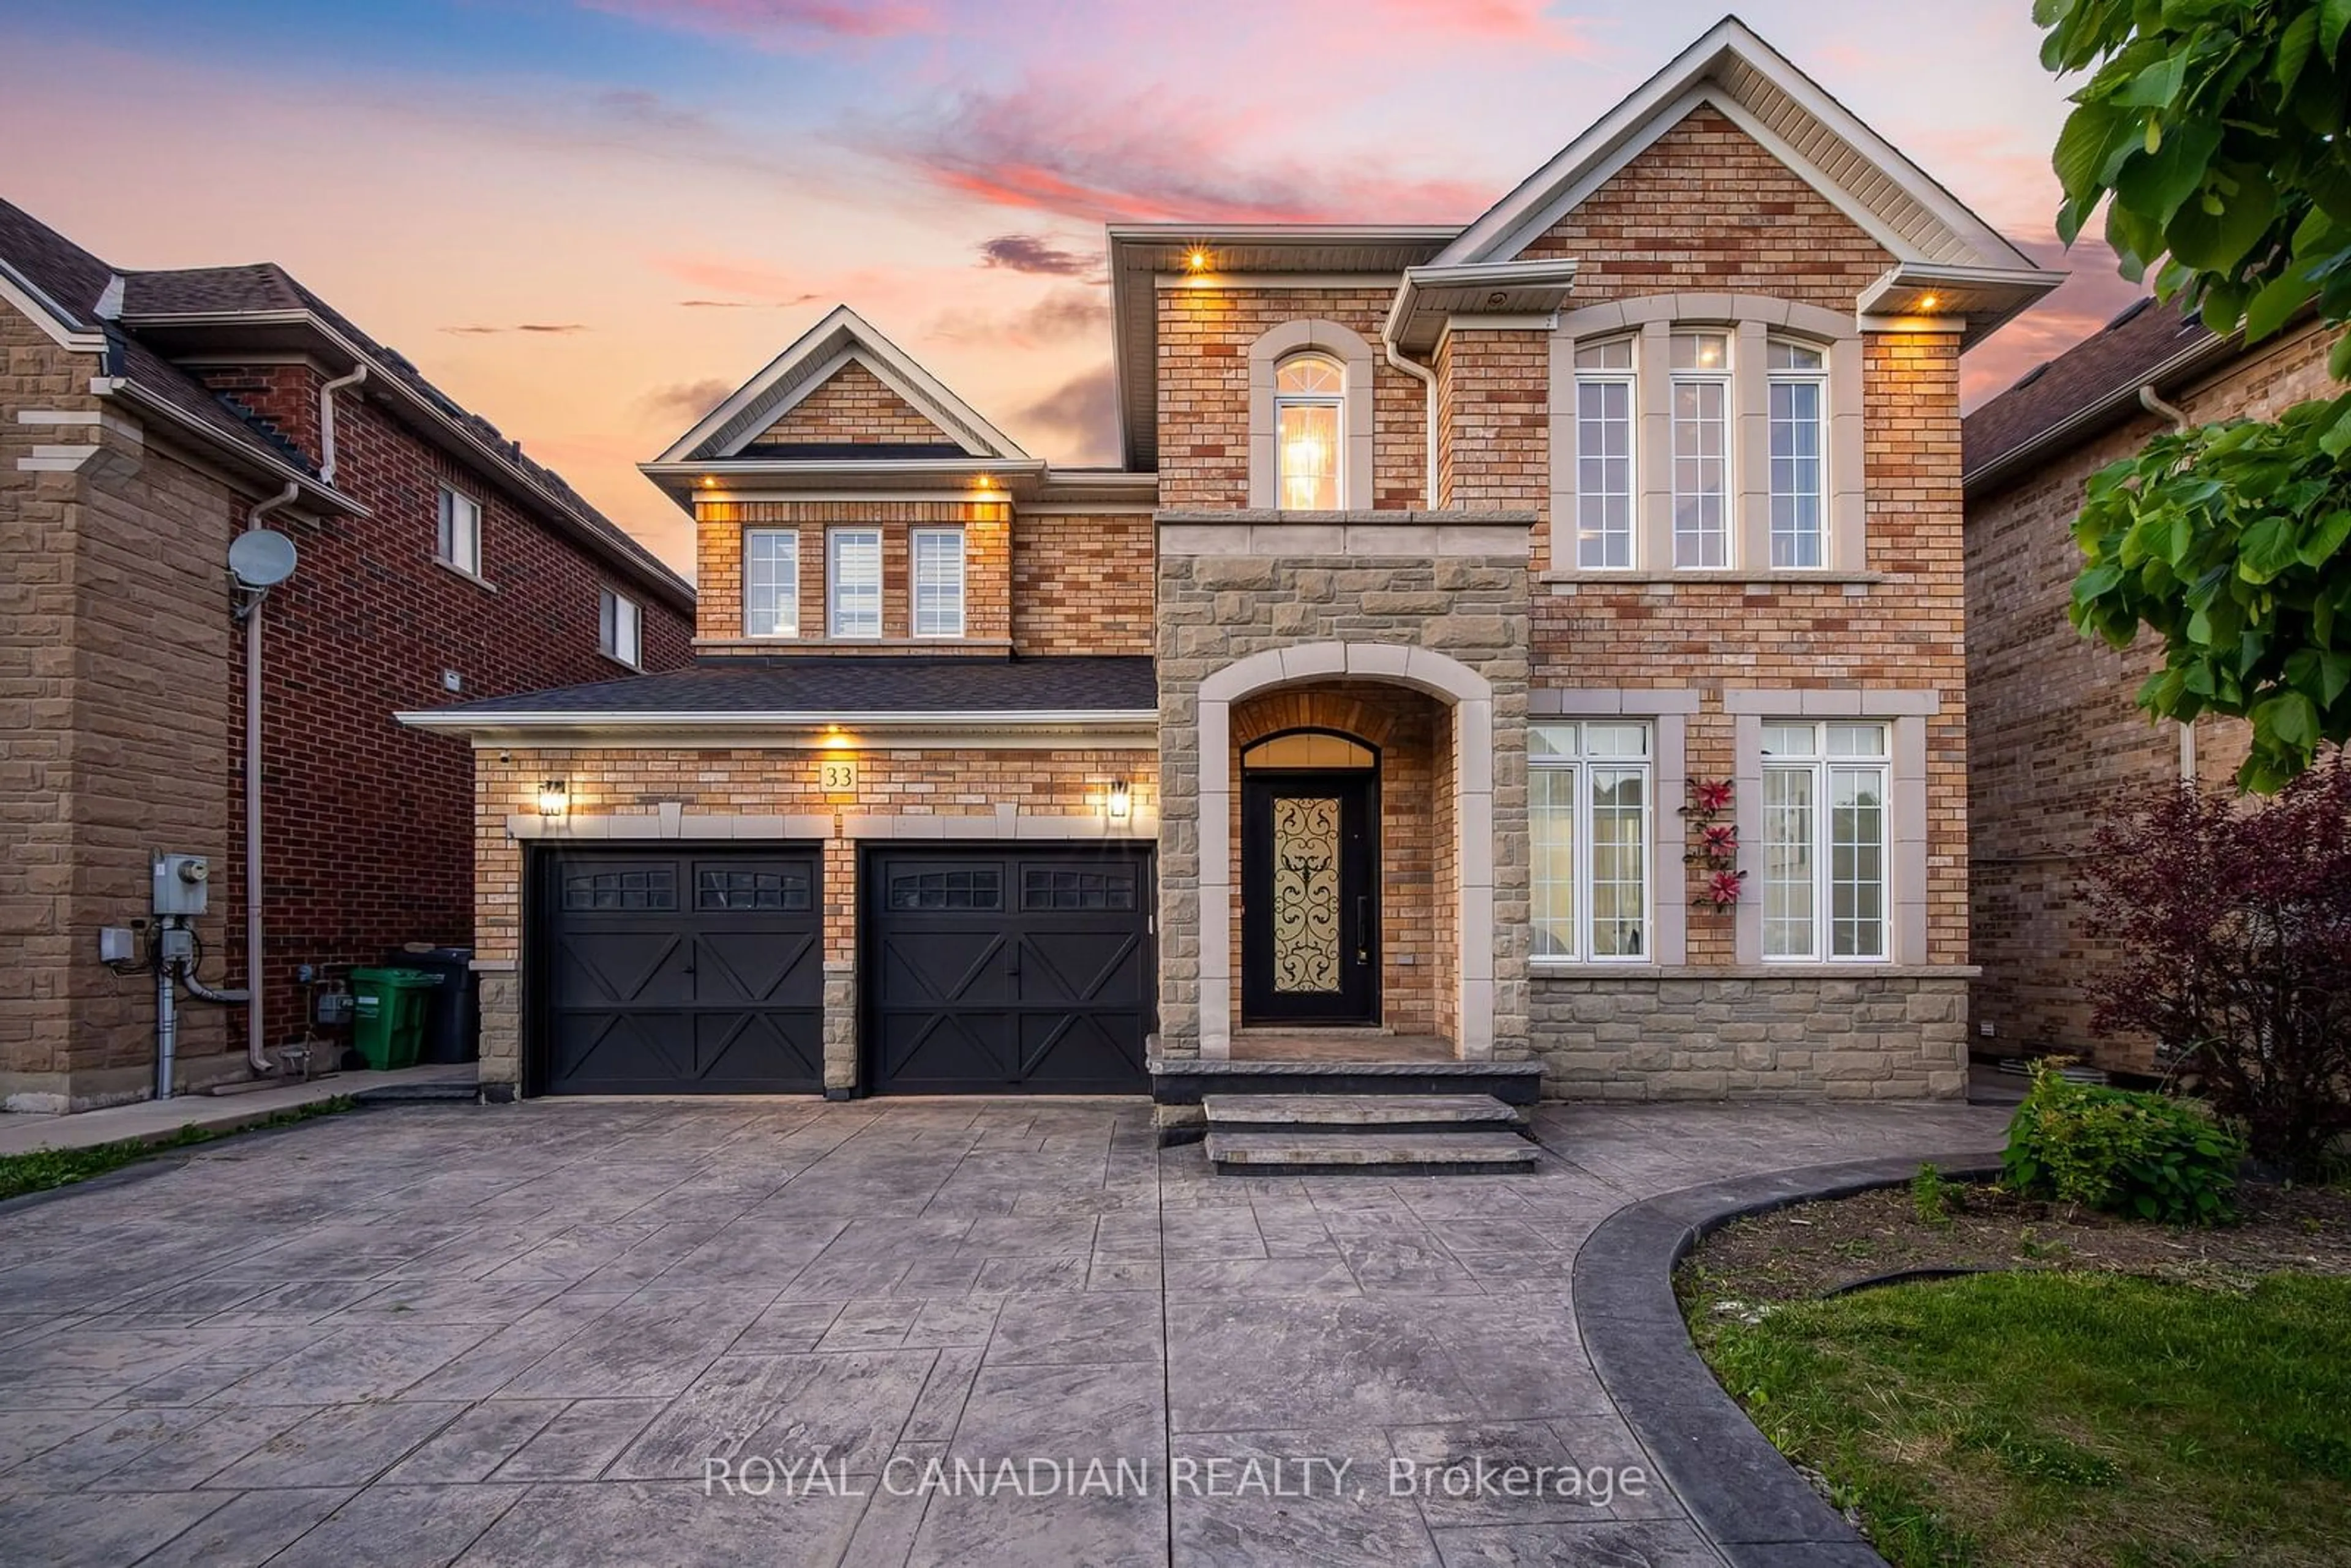 Home with brick exterior material for 33 Rubysilver Dr, Brampton Ontario L6P 1R1